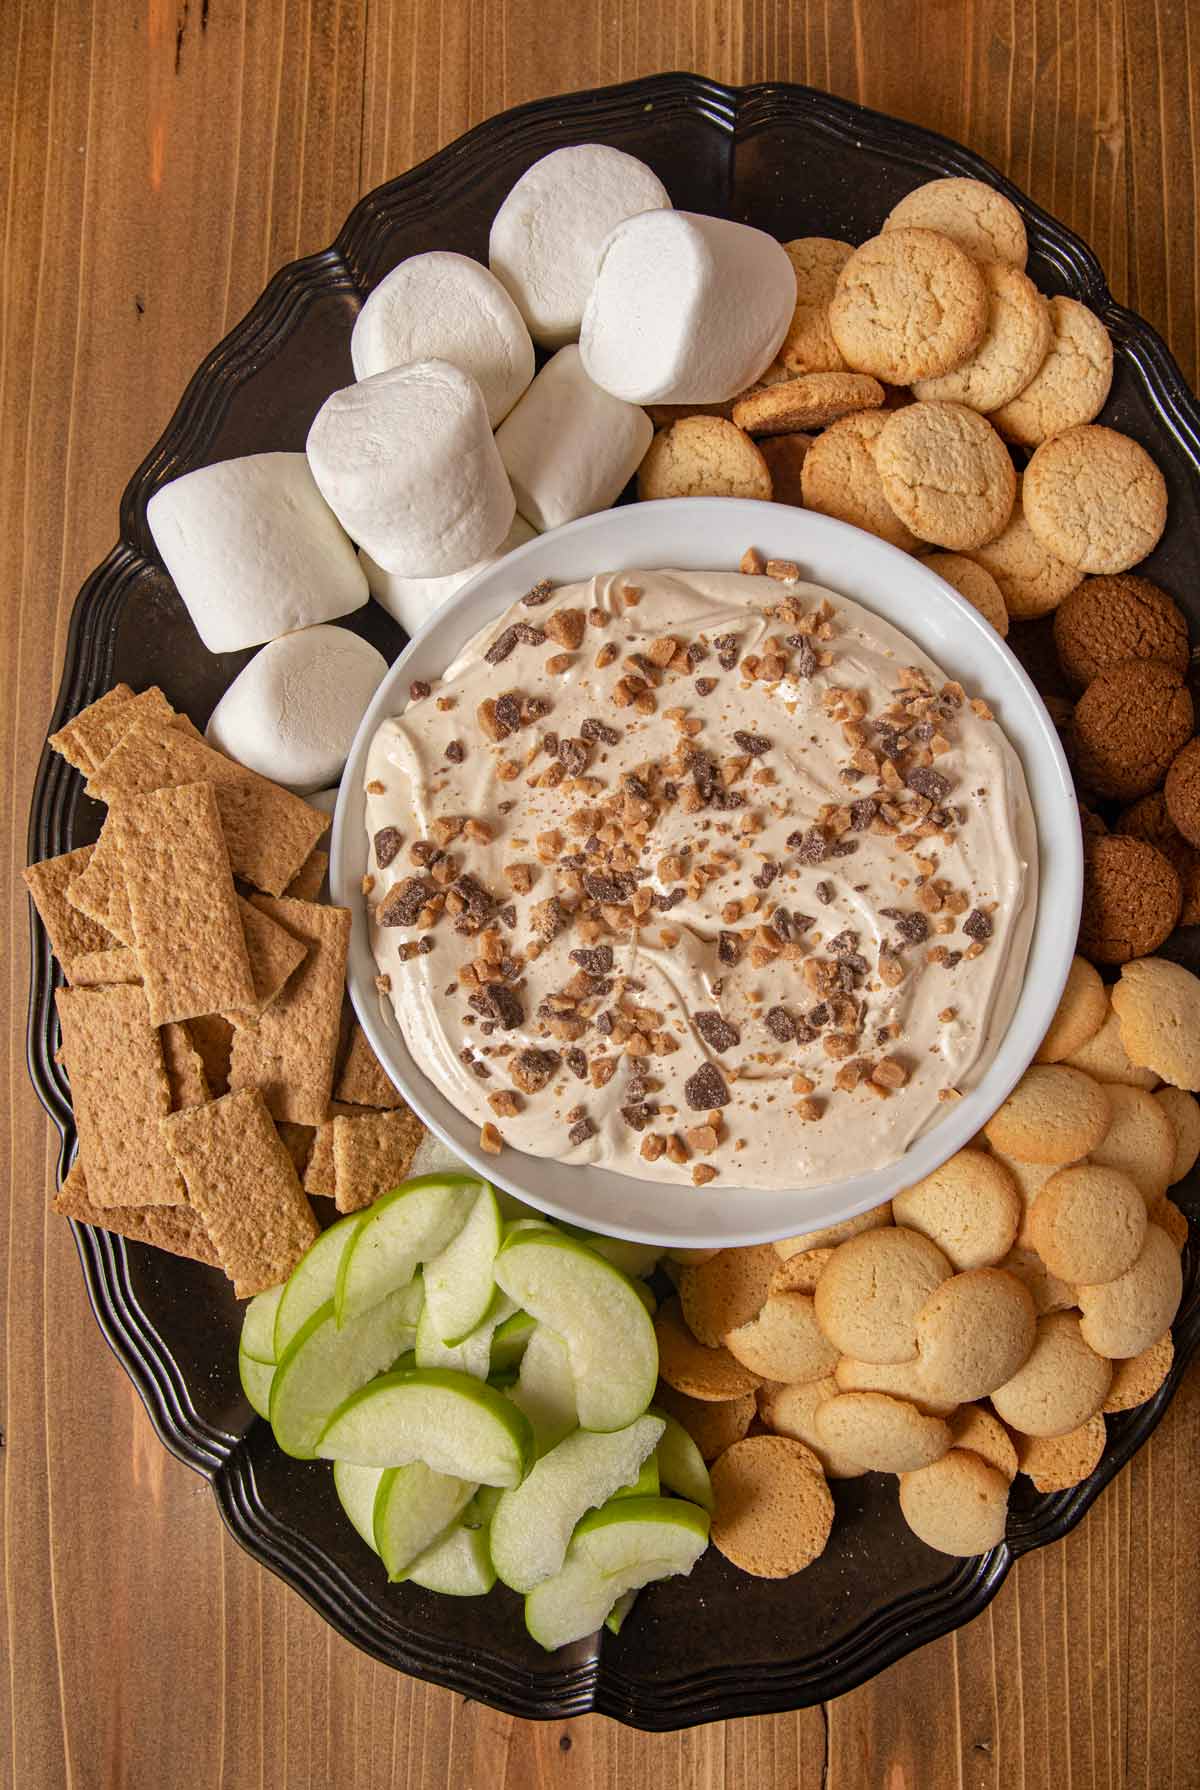 Toffee Apple Dip bowl on tray with foods for dipping